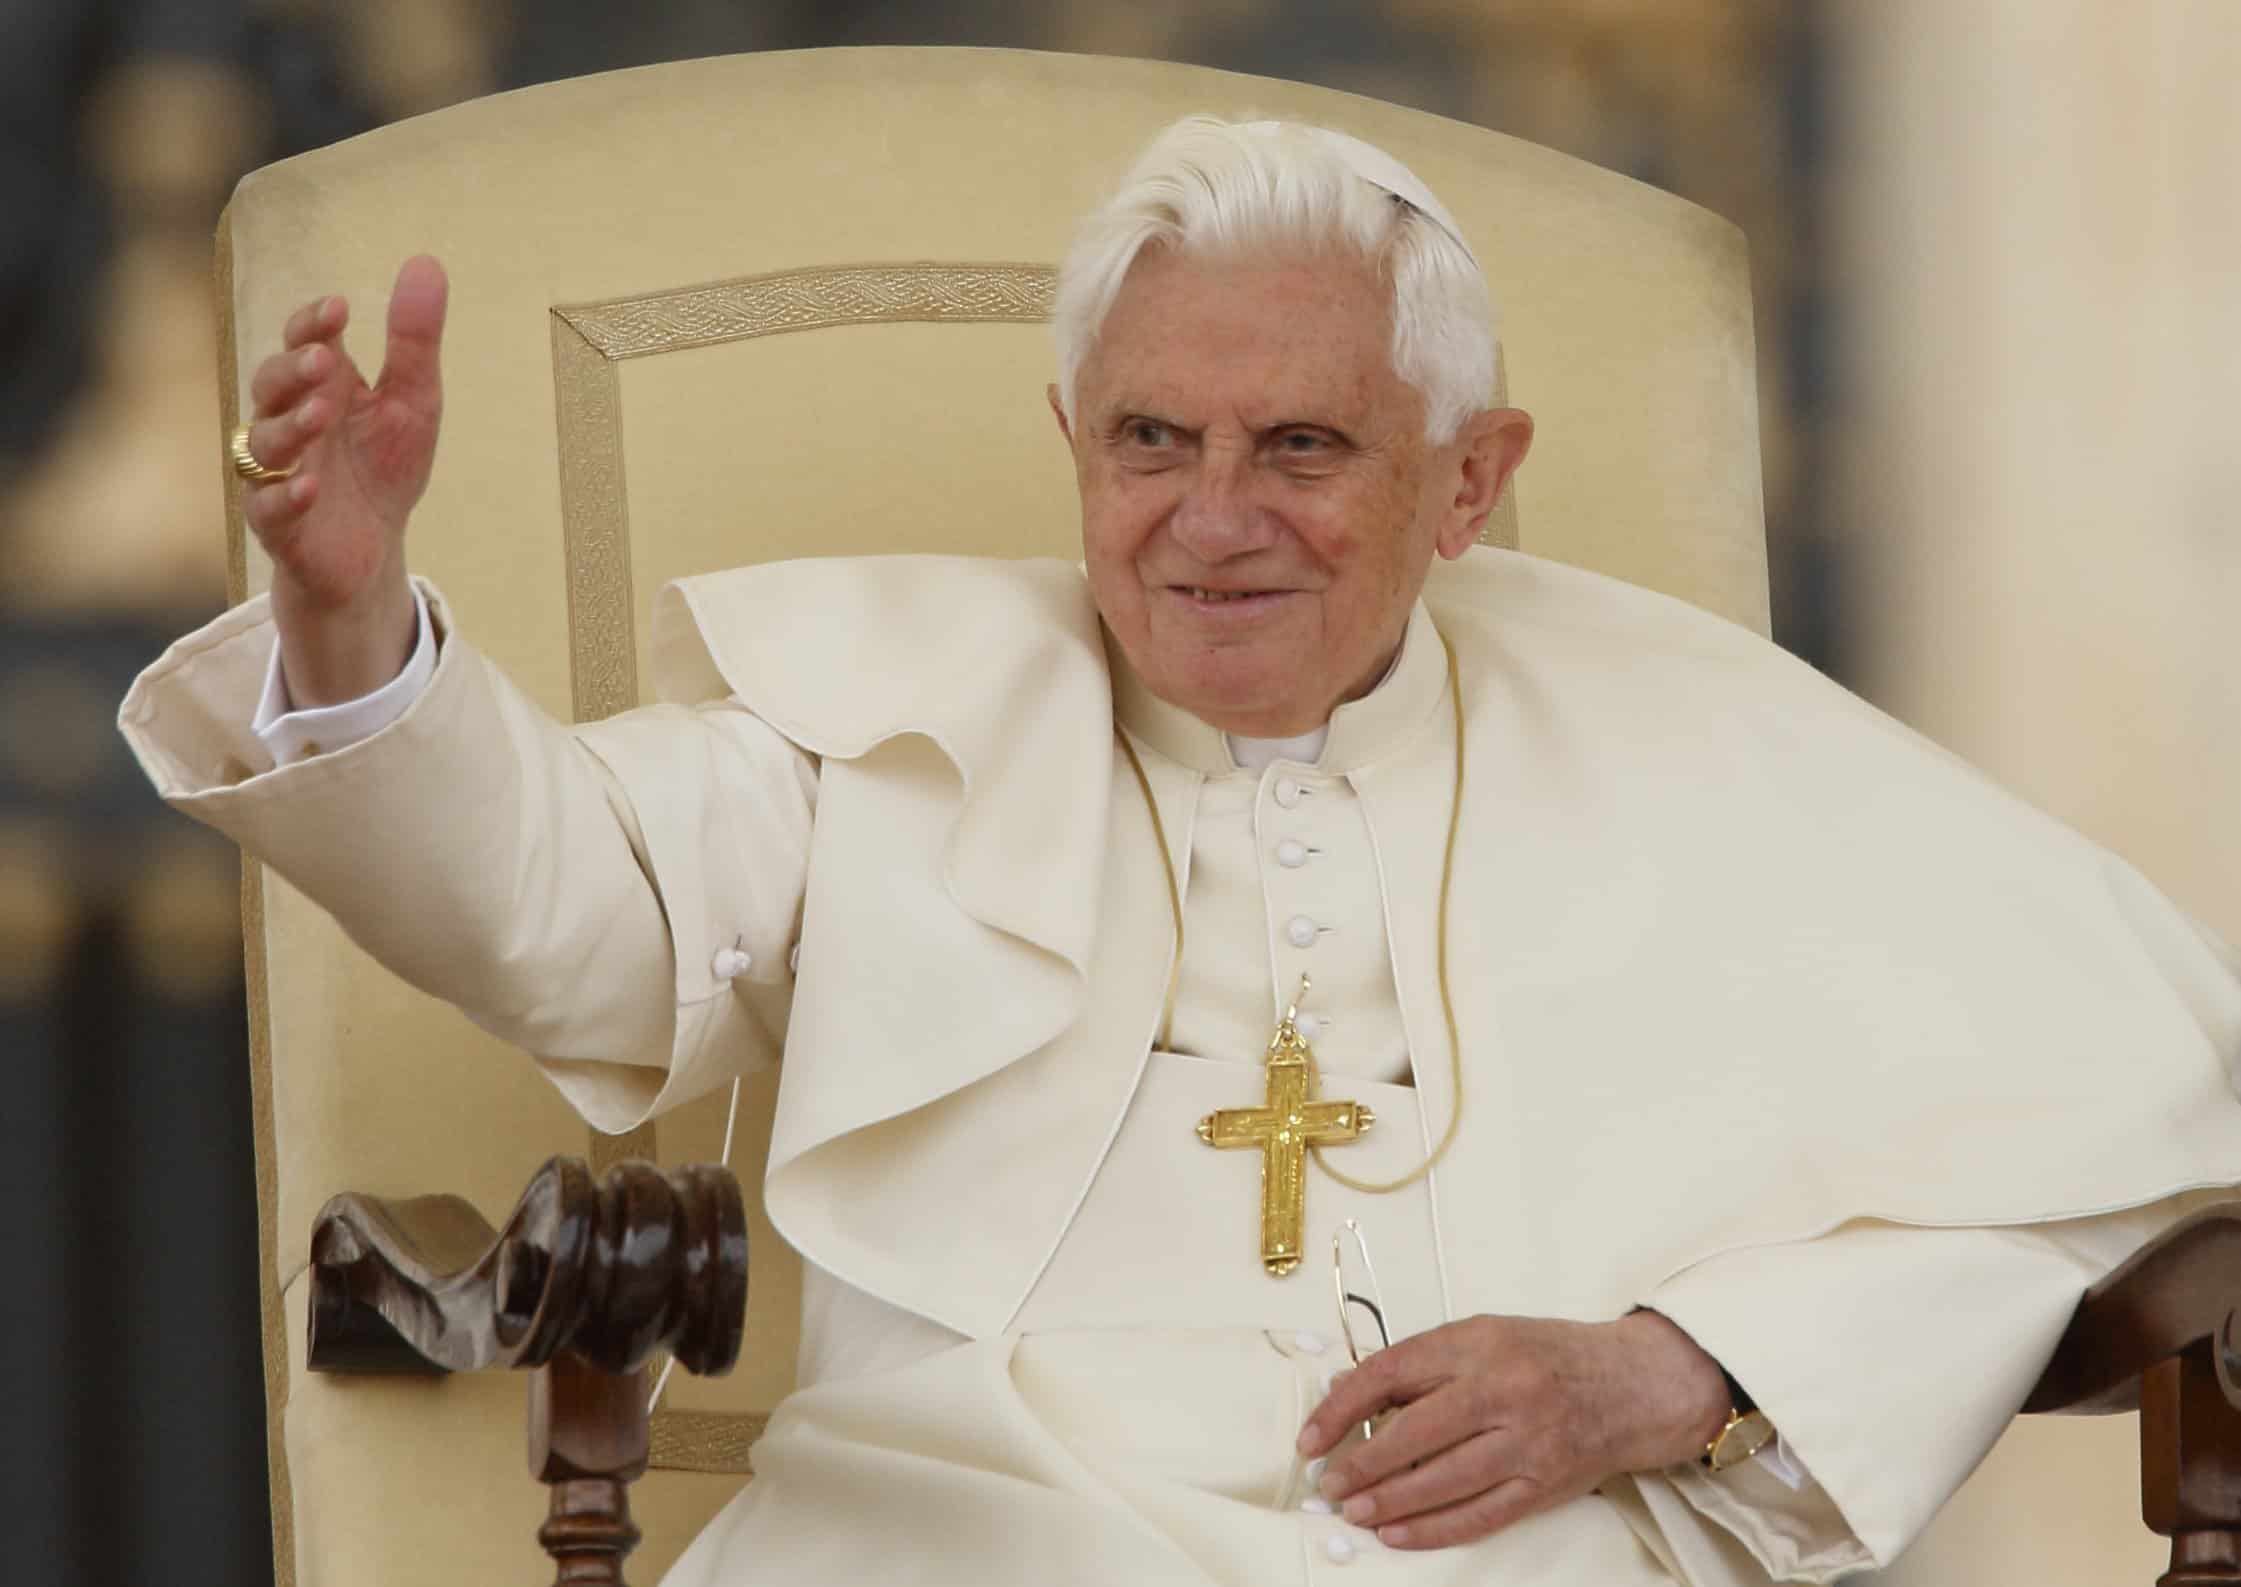 Pope Benedict XVI acknowledges pilgrims during his general audience in St. Peter's Square at the Vatican Nov. 4, 2009. Pope Benedict died Dec. 31, 2022, at the age of 95 in his residence at the Vatican. (CNS photo/Paul Haring)